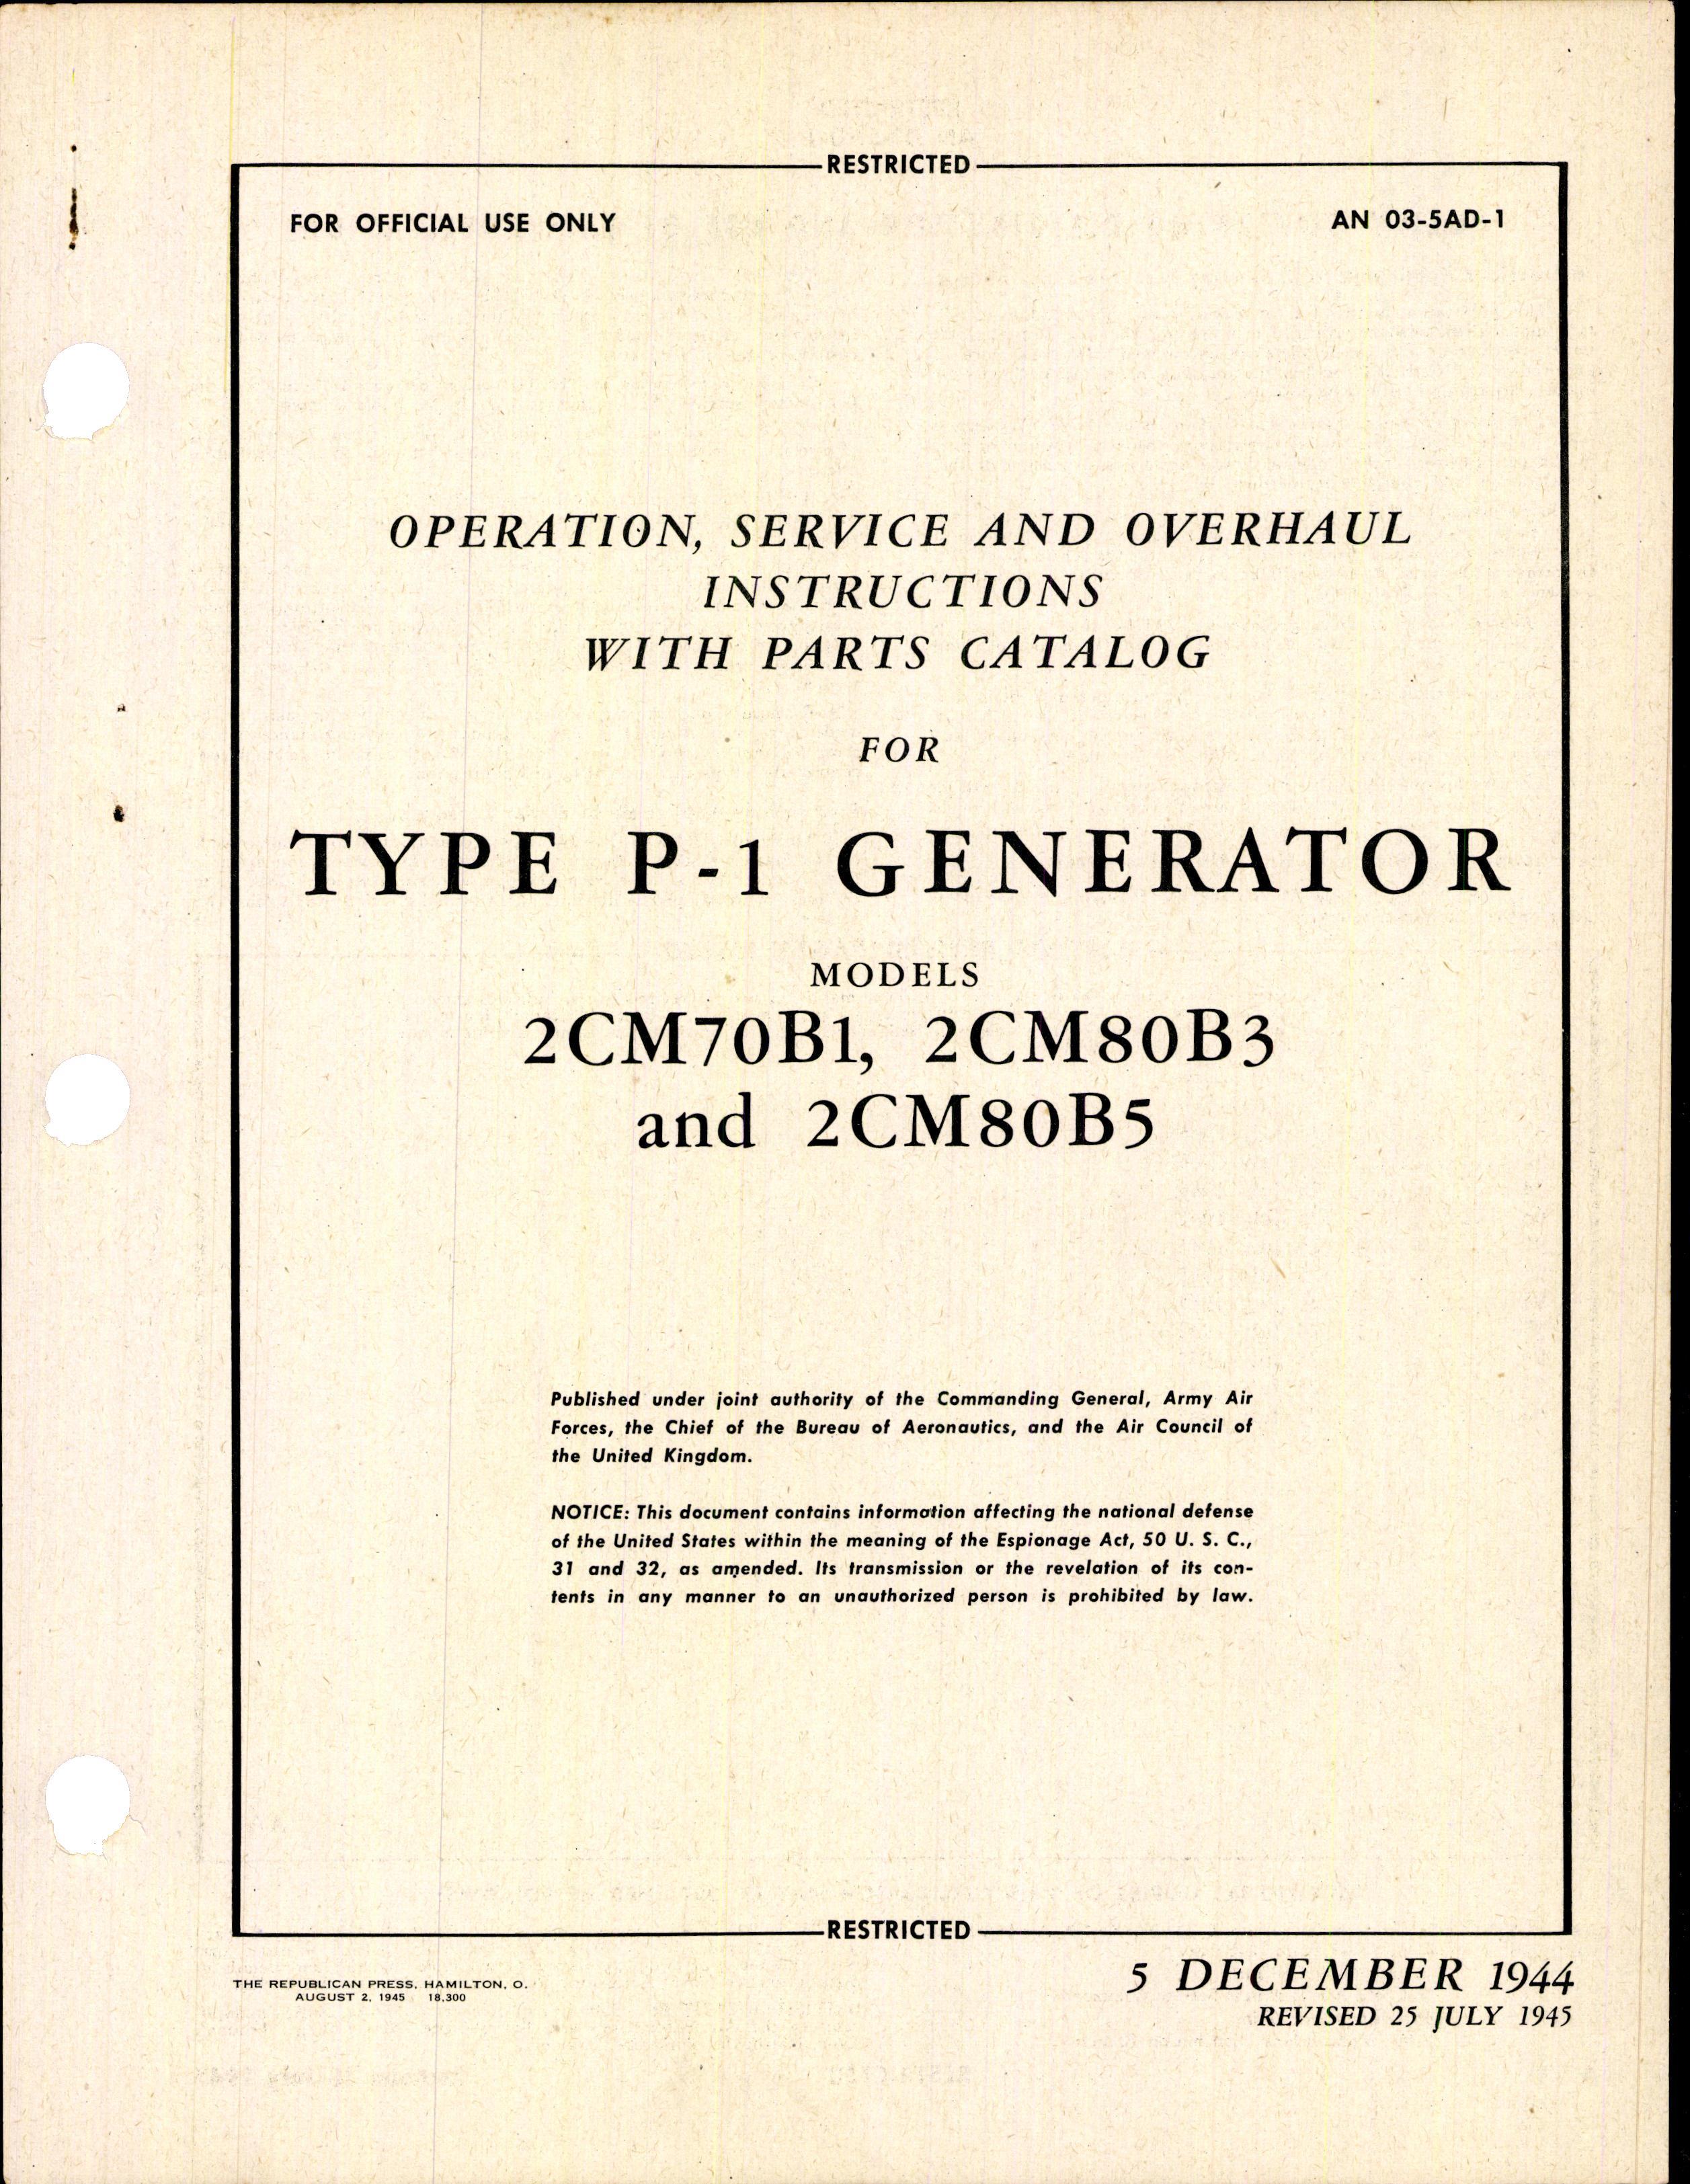 Sample page 3 from AirCorps Library document: Instructions with Parts Catalog for Type P-1 Generator